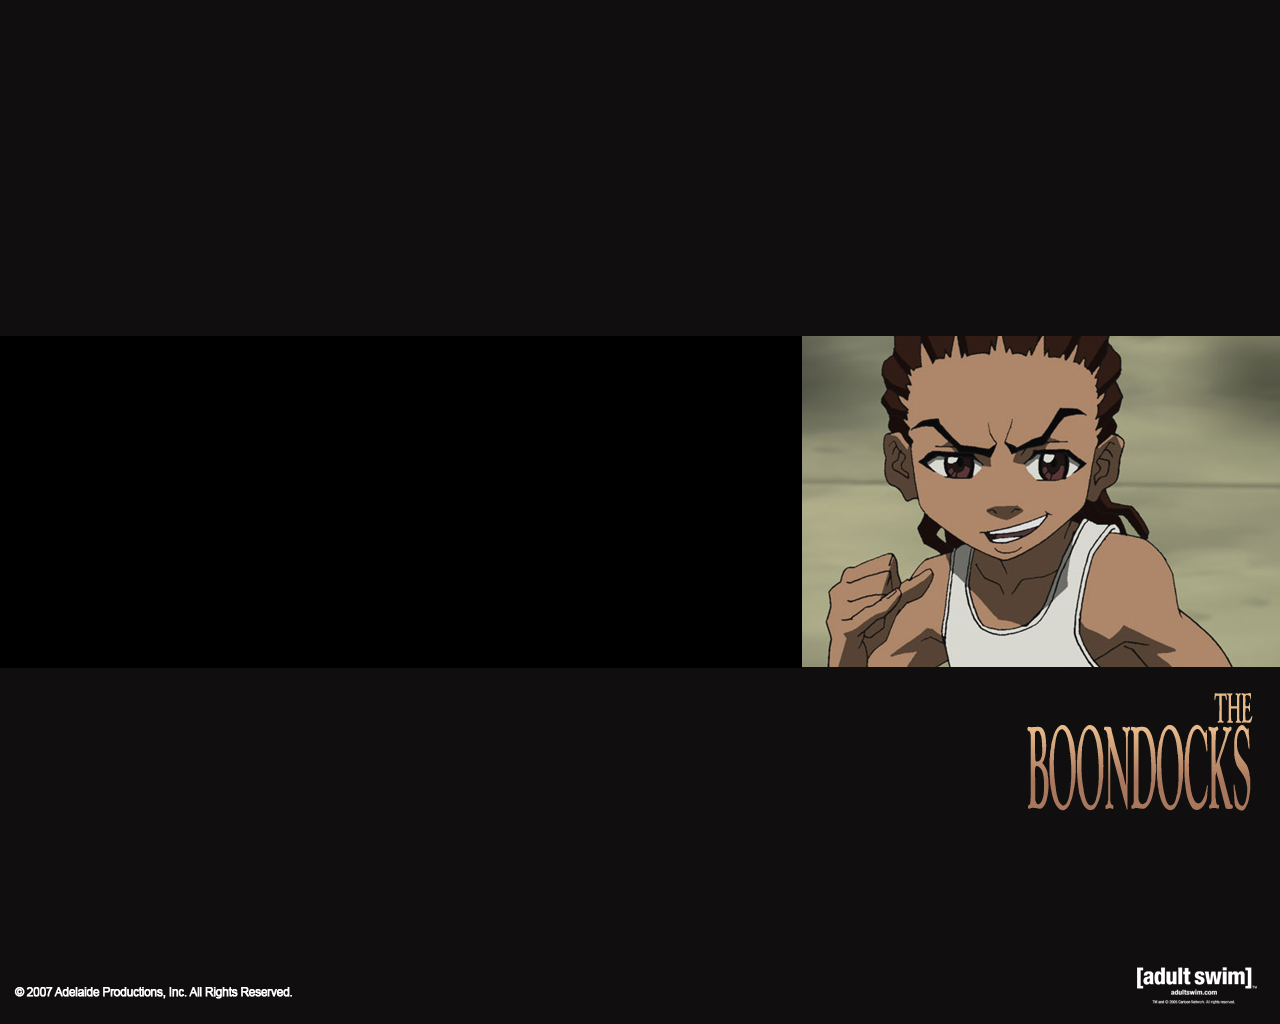 The Boondocks Desktop Wallpaper For HD Widescreen And Mobile